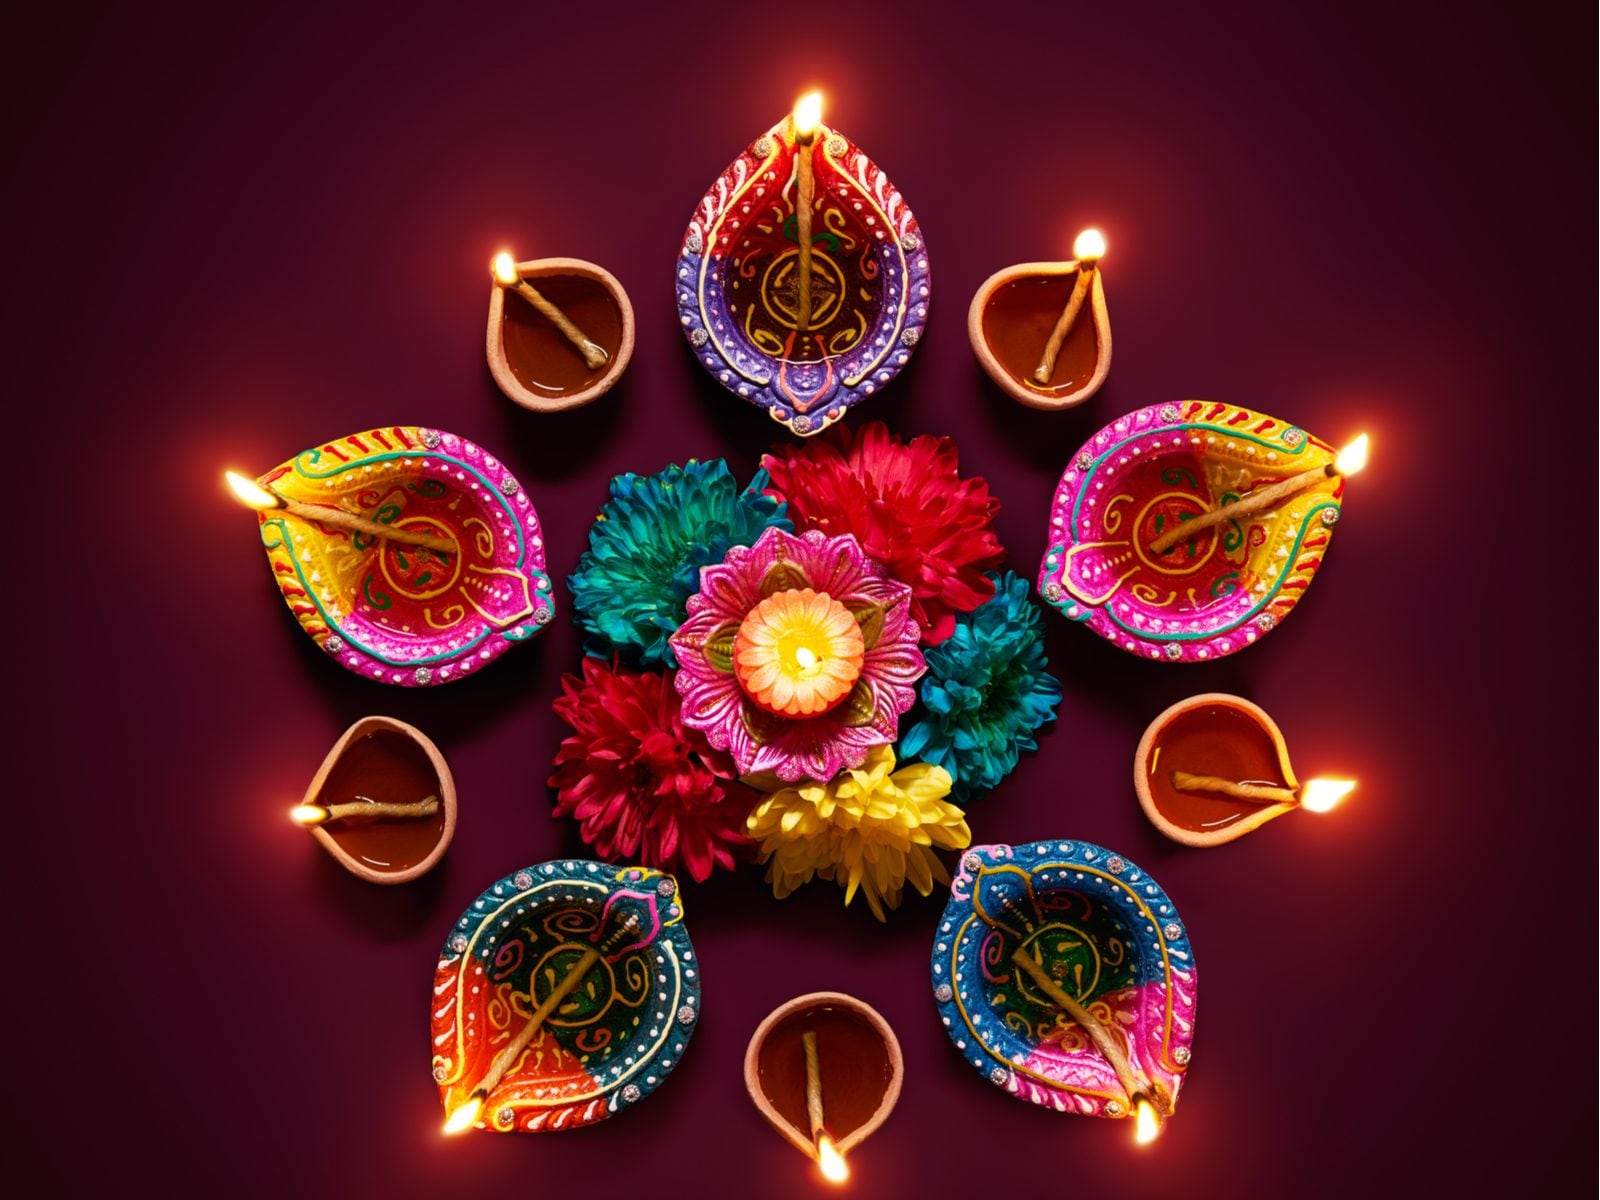 Diwali 2021: Know the Significance of 13 Diyas Used on Dhanteras